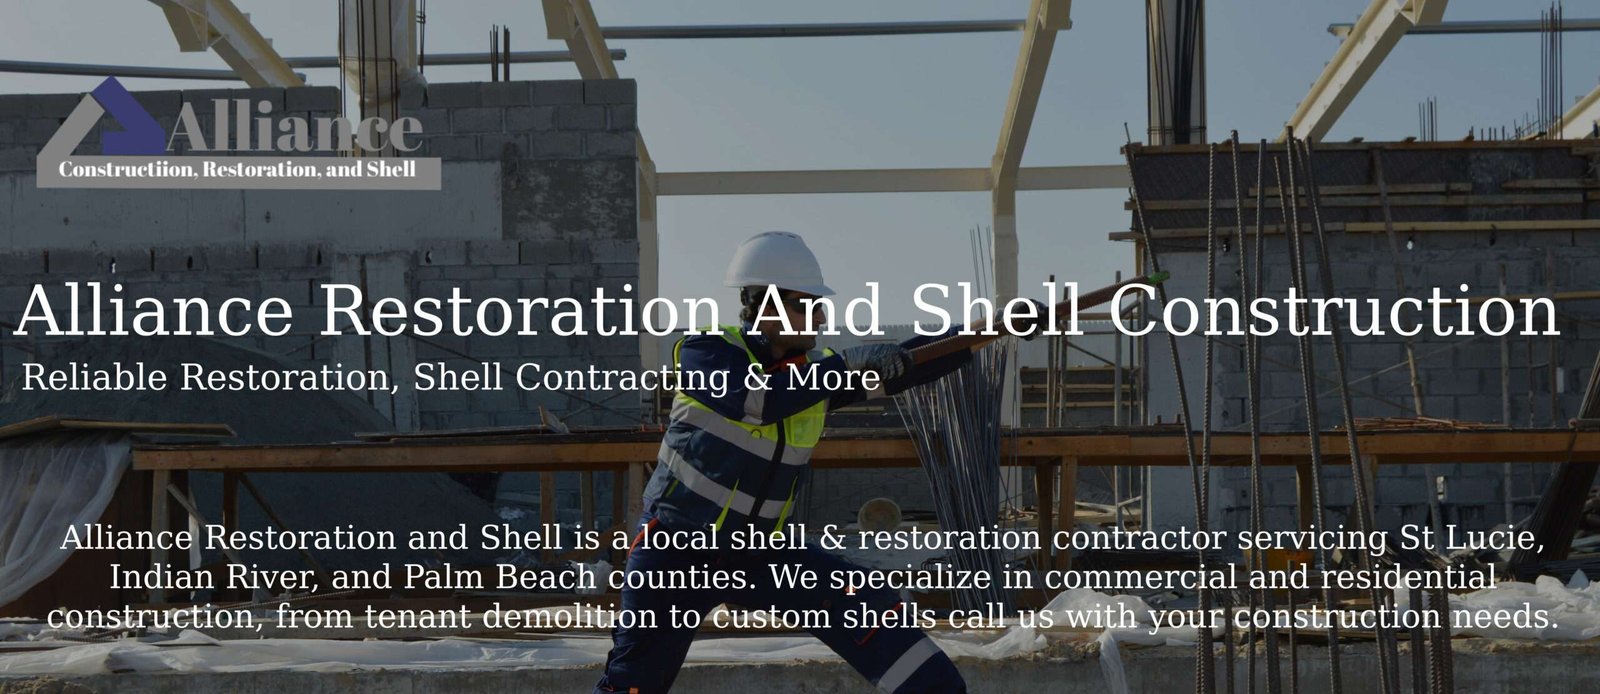 Alliance Restoration And Shell